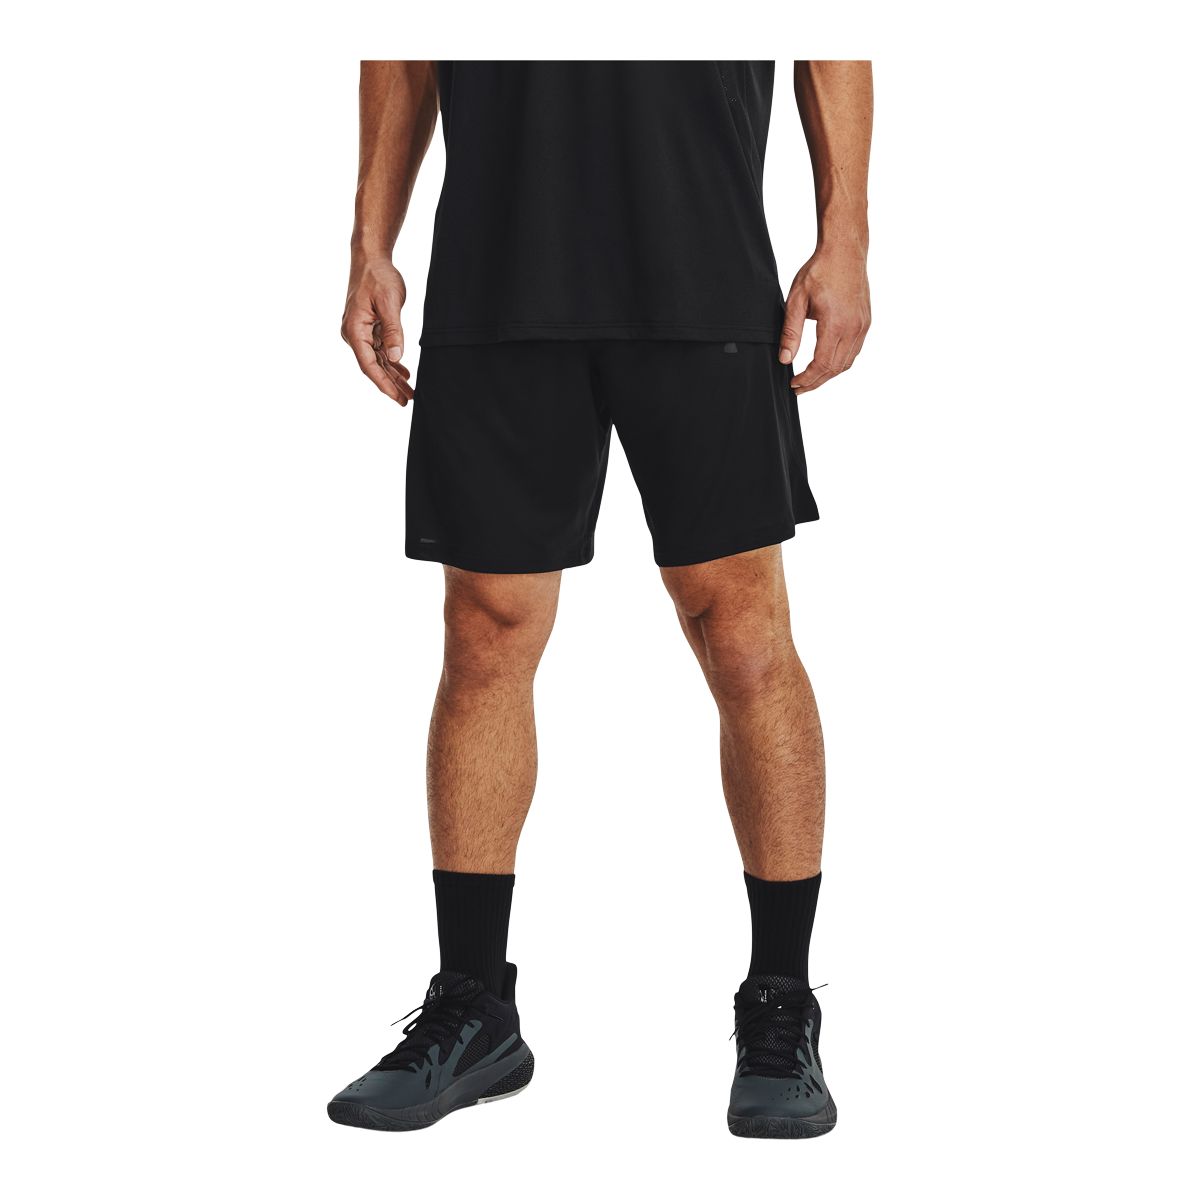 Under Armour Men's Baseline 10-in Basketball Shorts  Loose Fit Quick-Dry